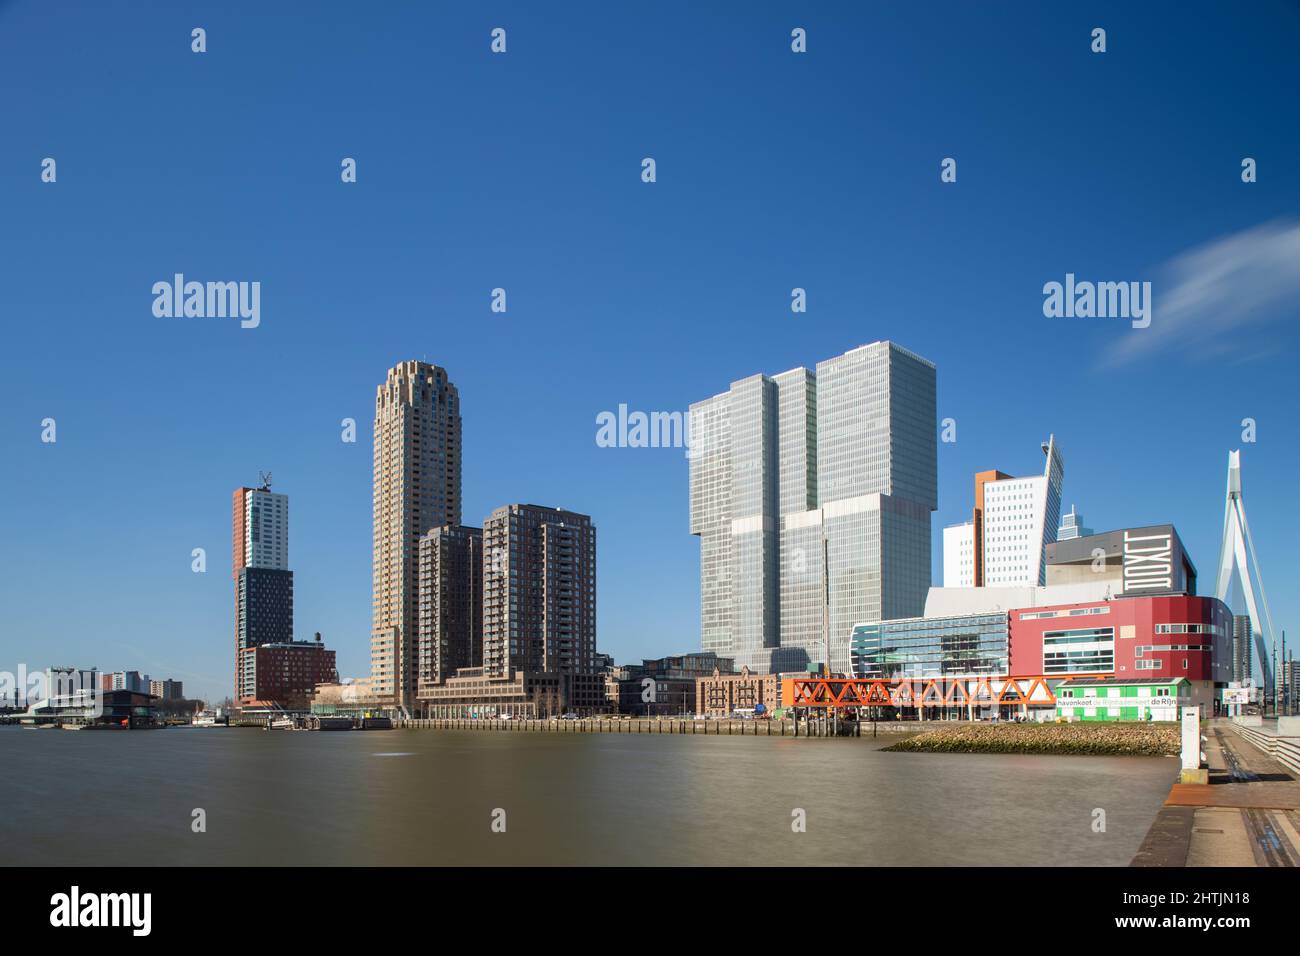 View on the Wilhelminapier with the impressive modern architecture in Rotterdam, the Netherlands Stock Photo